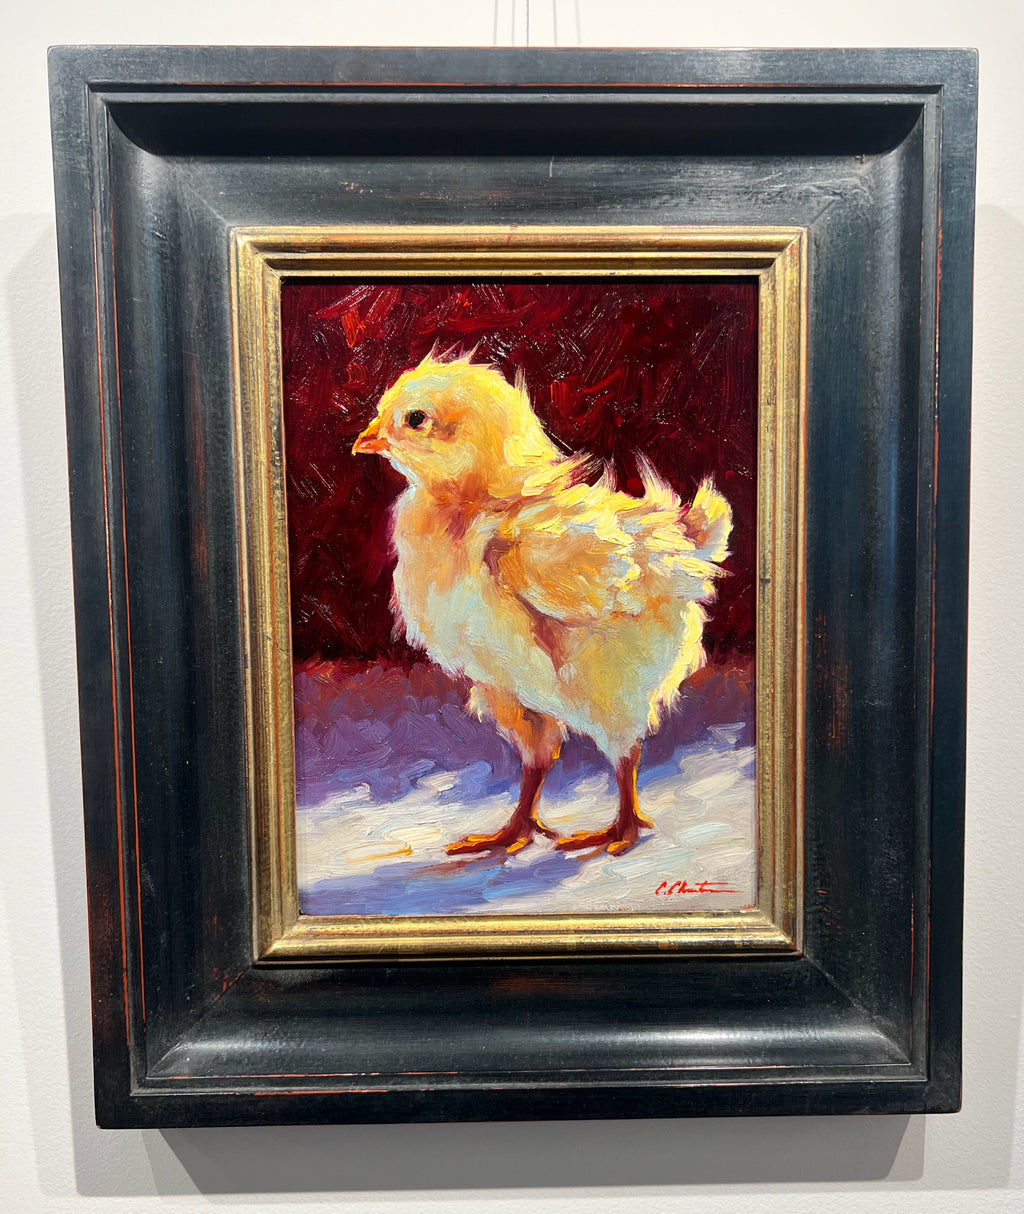 Oil on panel painting of a chick in slight left profile.